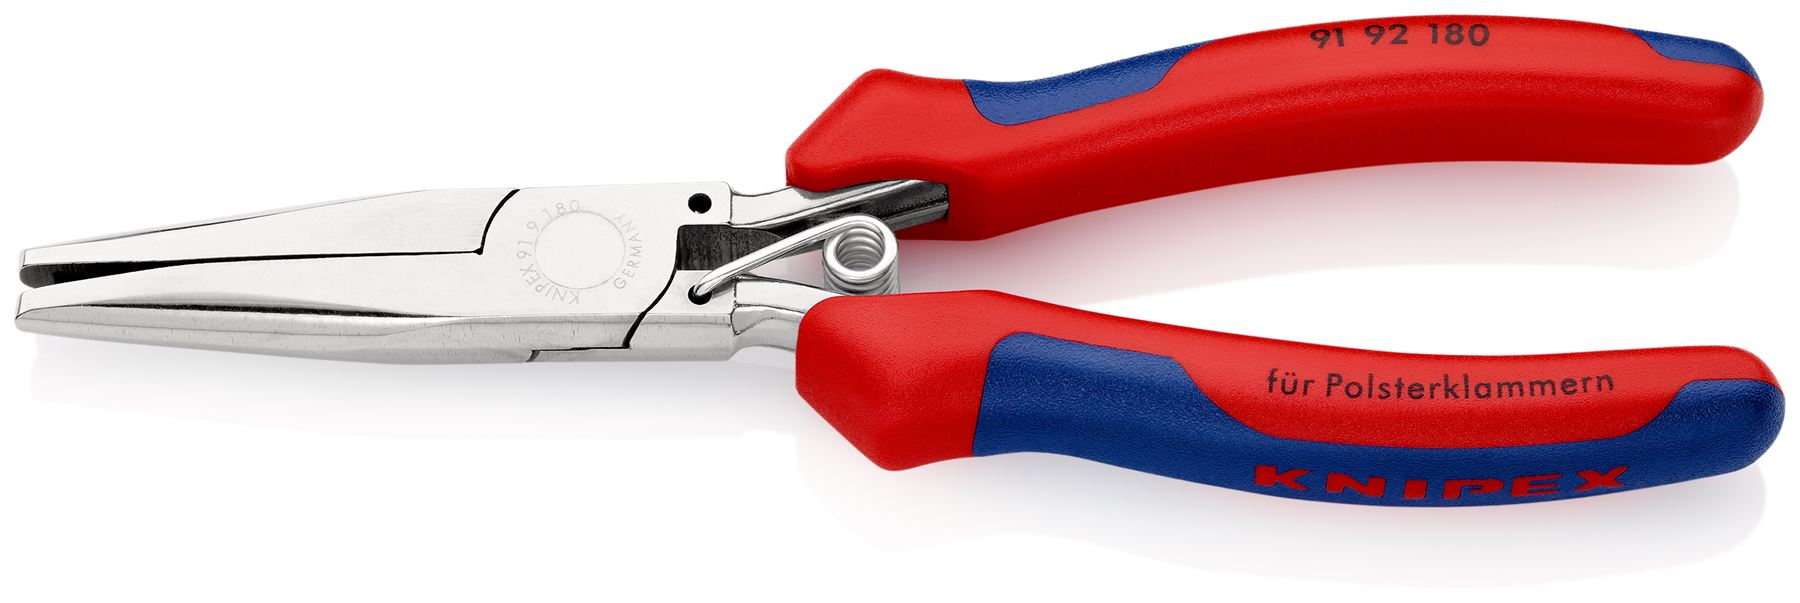 Knipex Upholstery Pliers 180mm Multi Component Grips 71 92 180